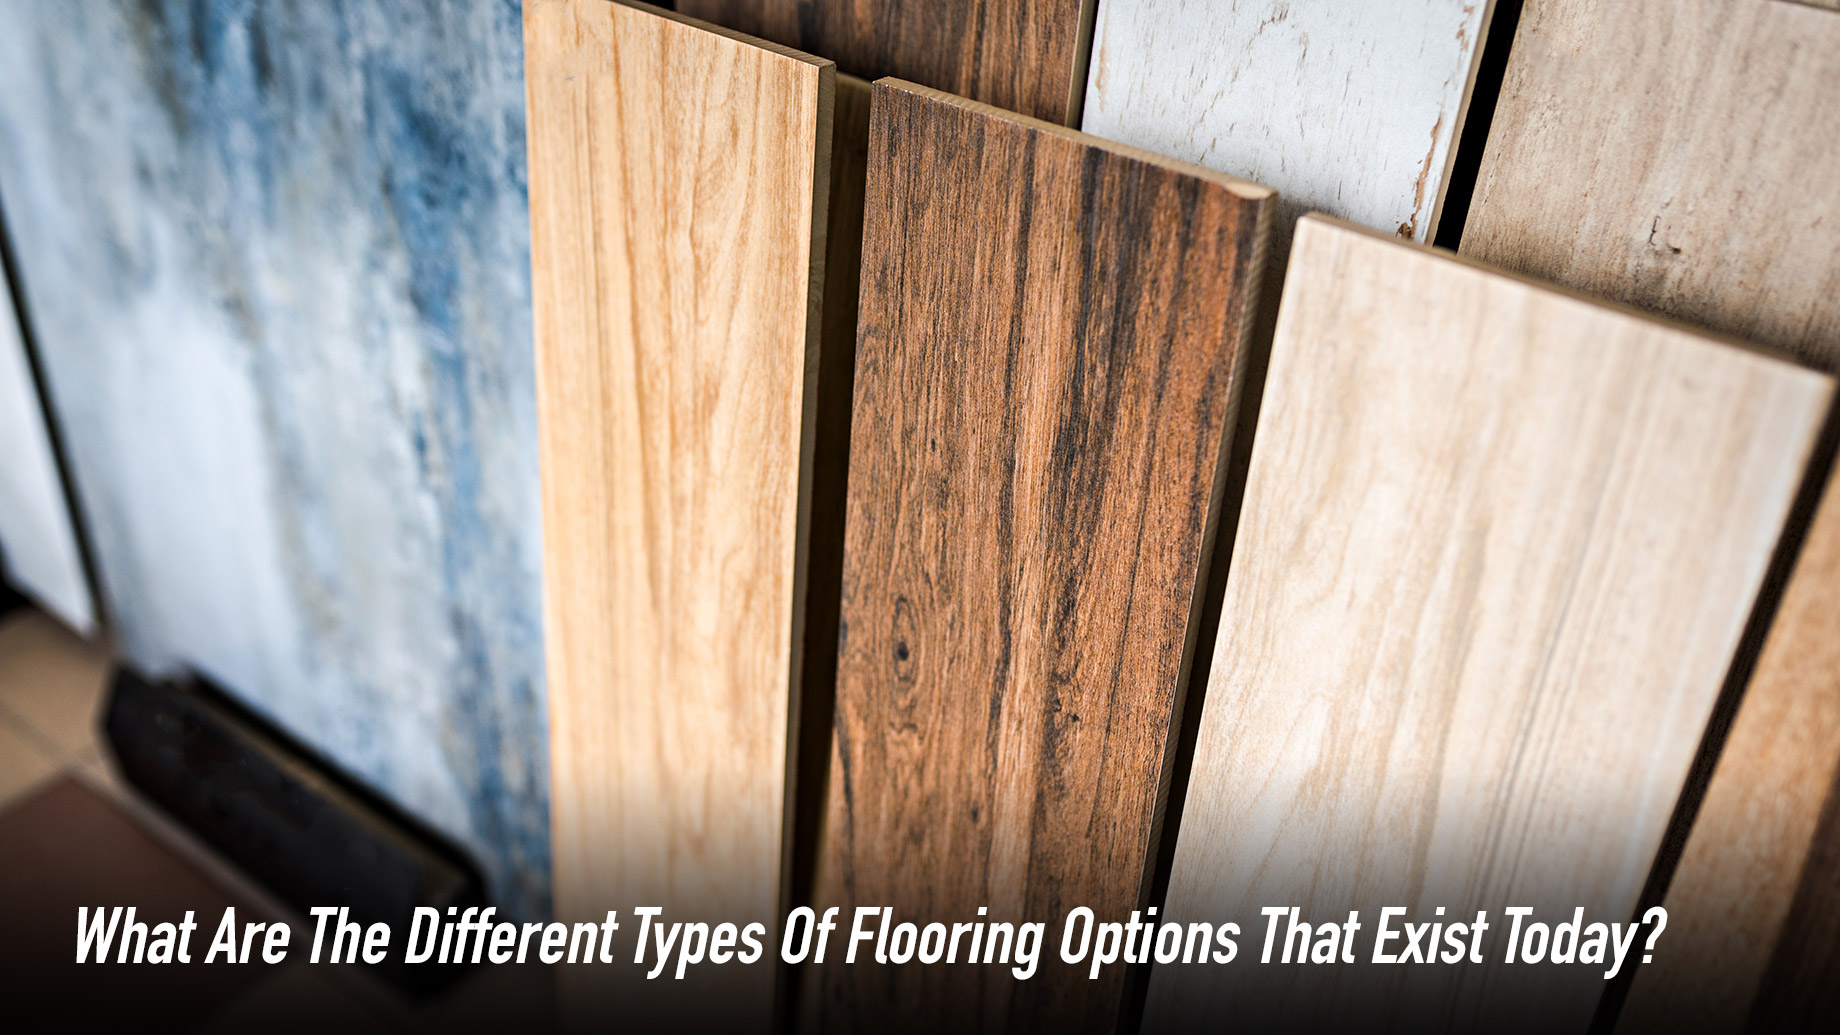 What Are The Different Types Of Flooring Options That Exist Today?